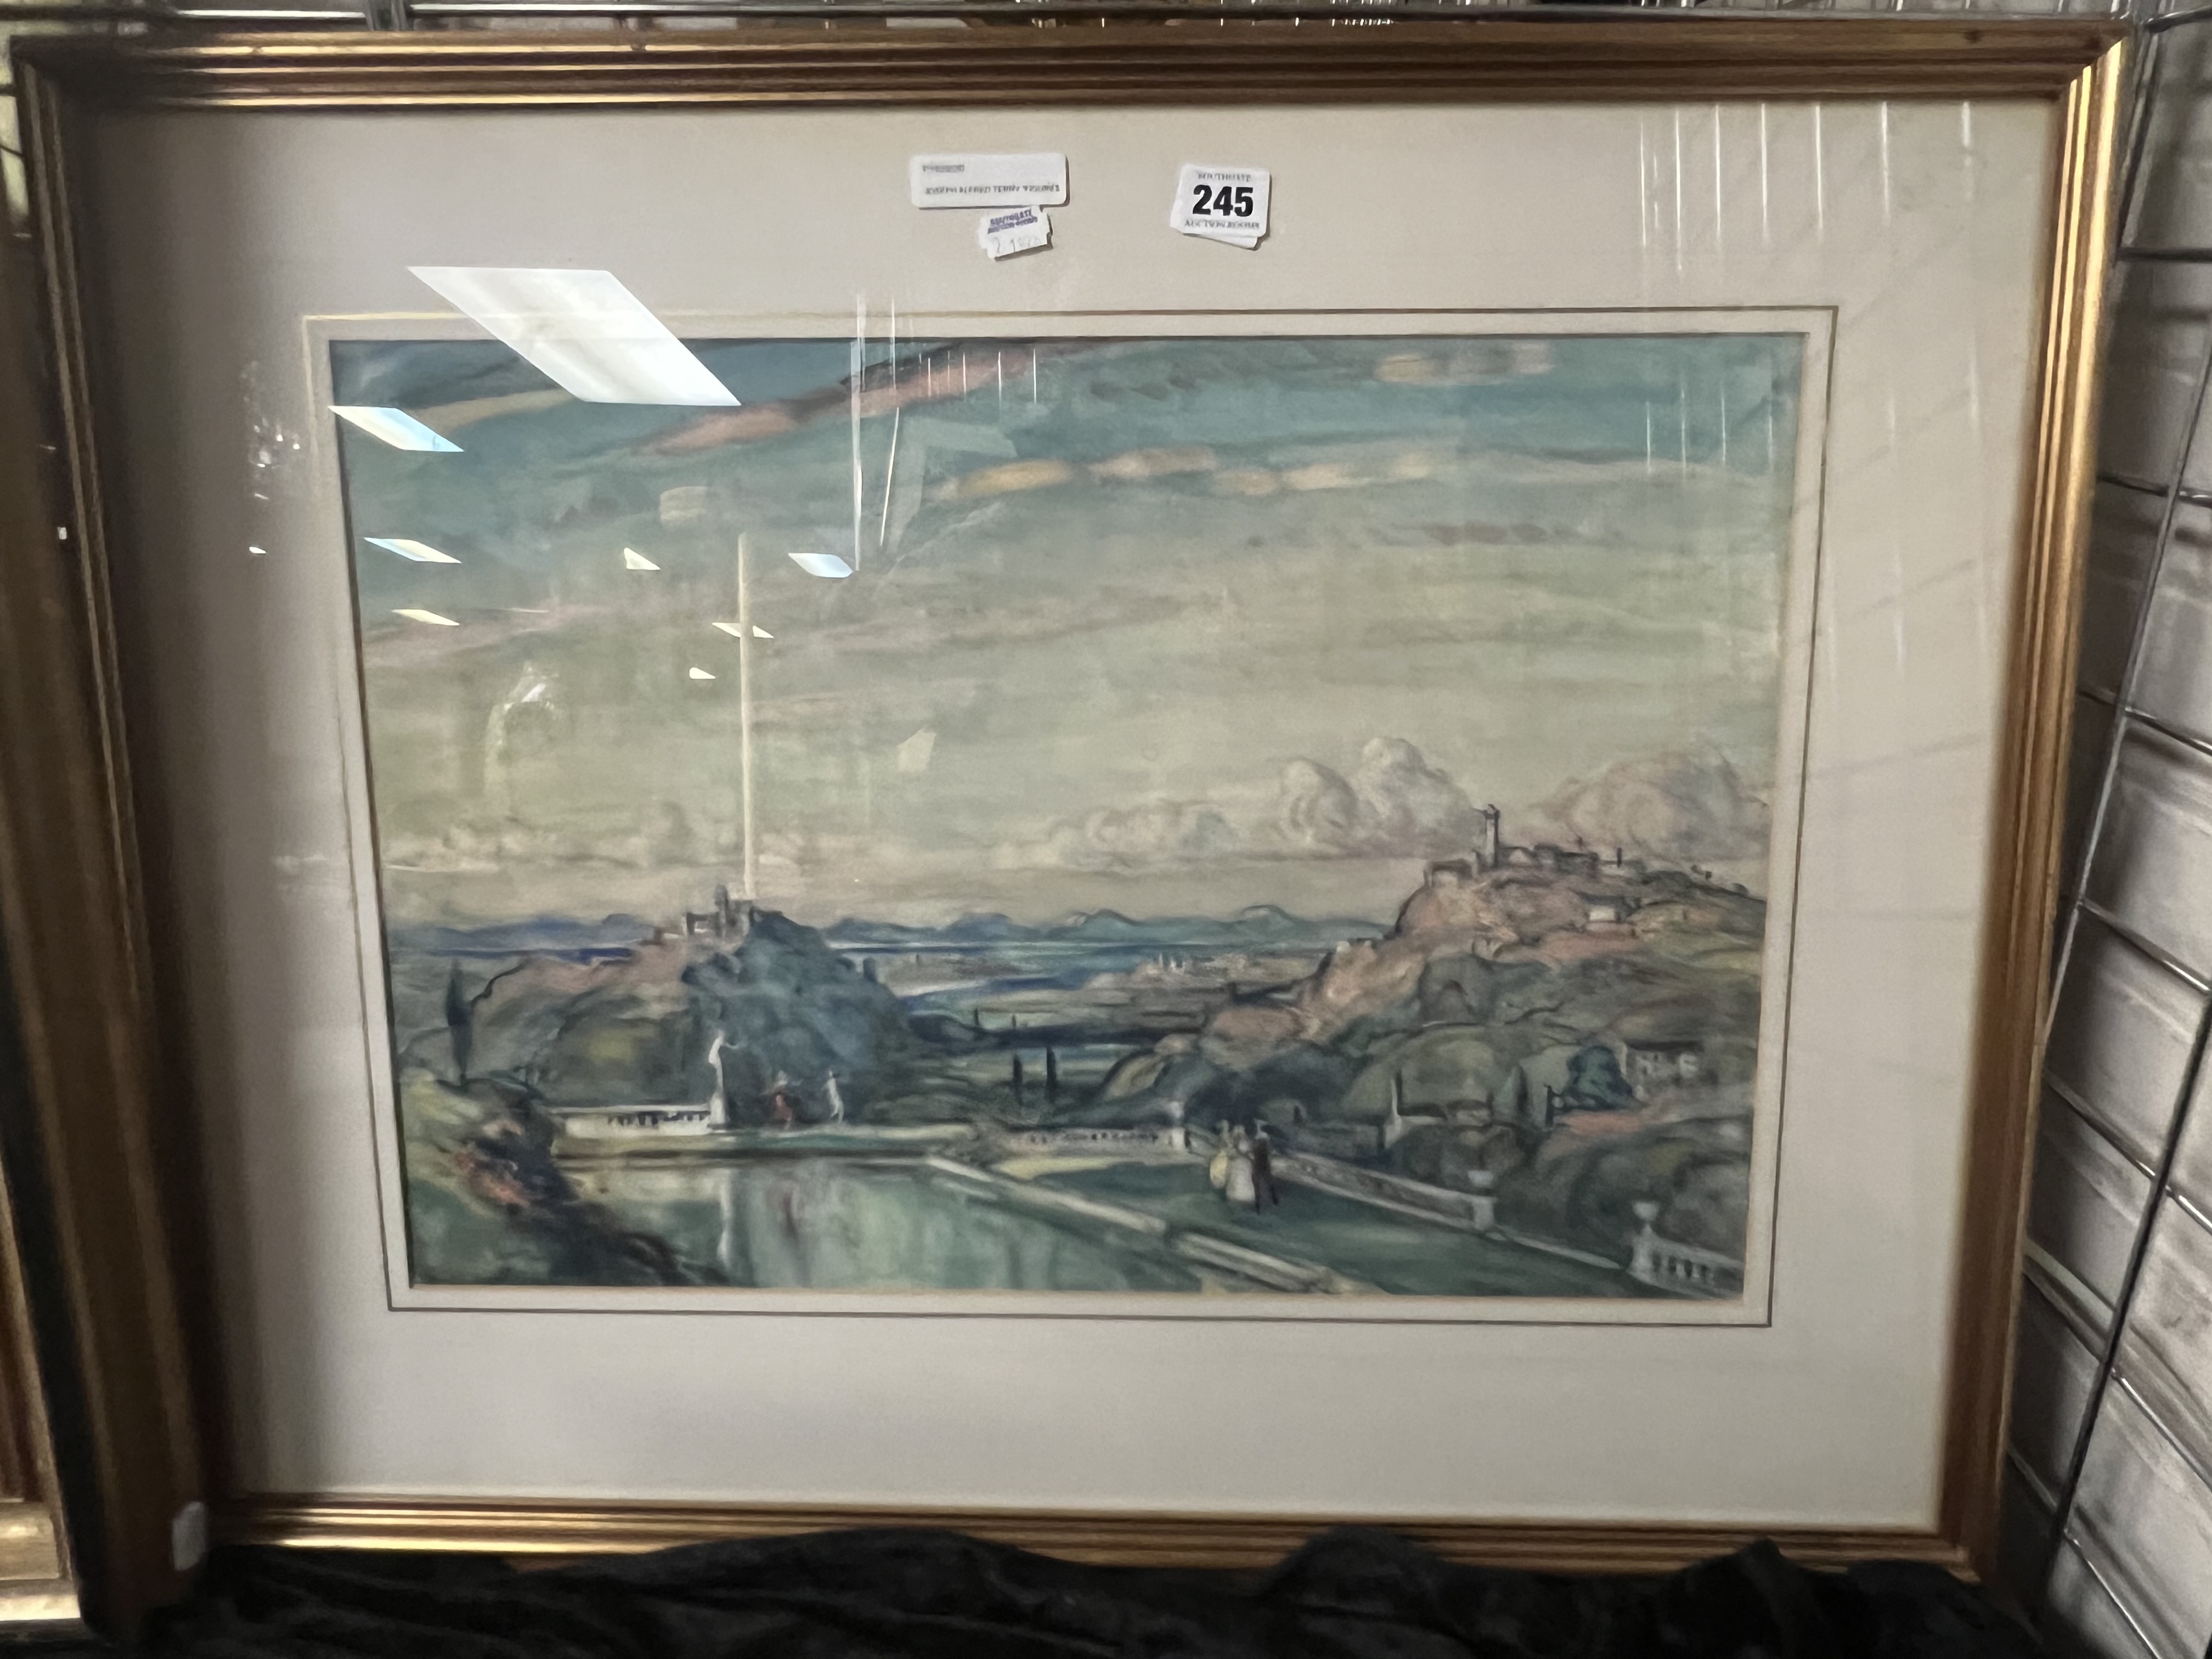 JOSEPH ALFRED TERRY 'FIGURES ON TERRACE' FRAMED PICTURE - SOLD AT CHRISTIES IN 1986